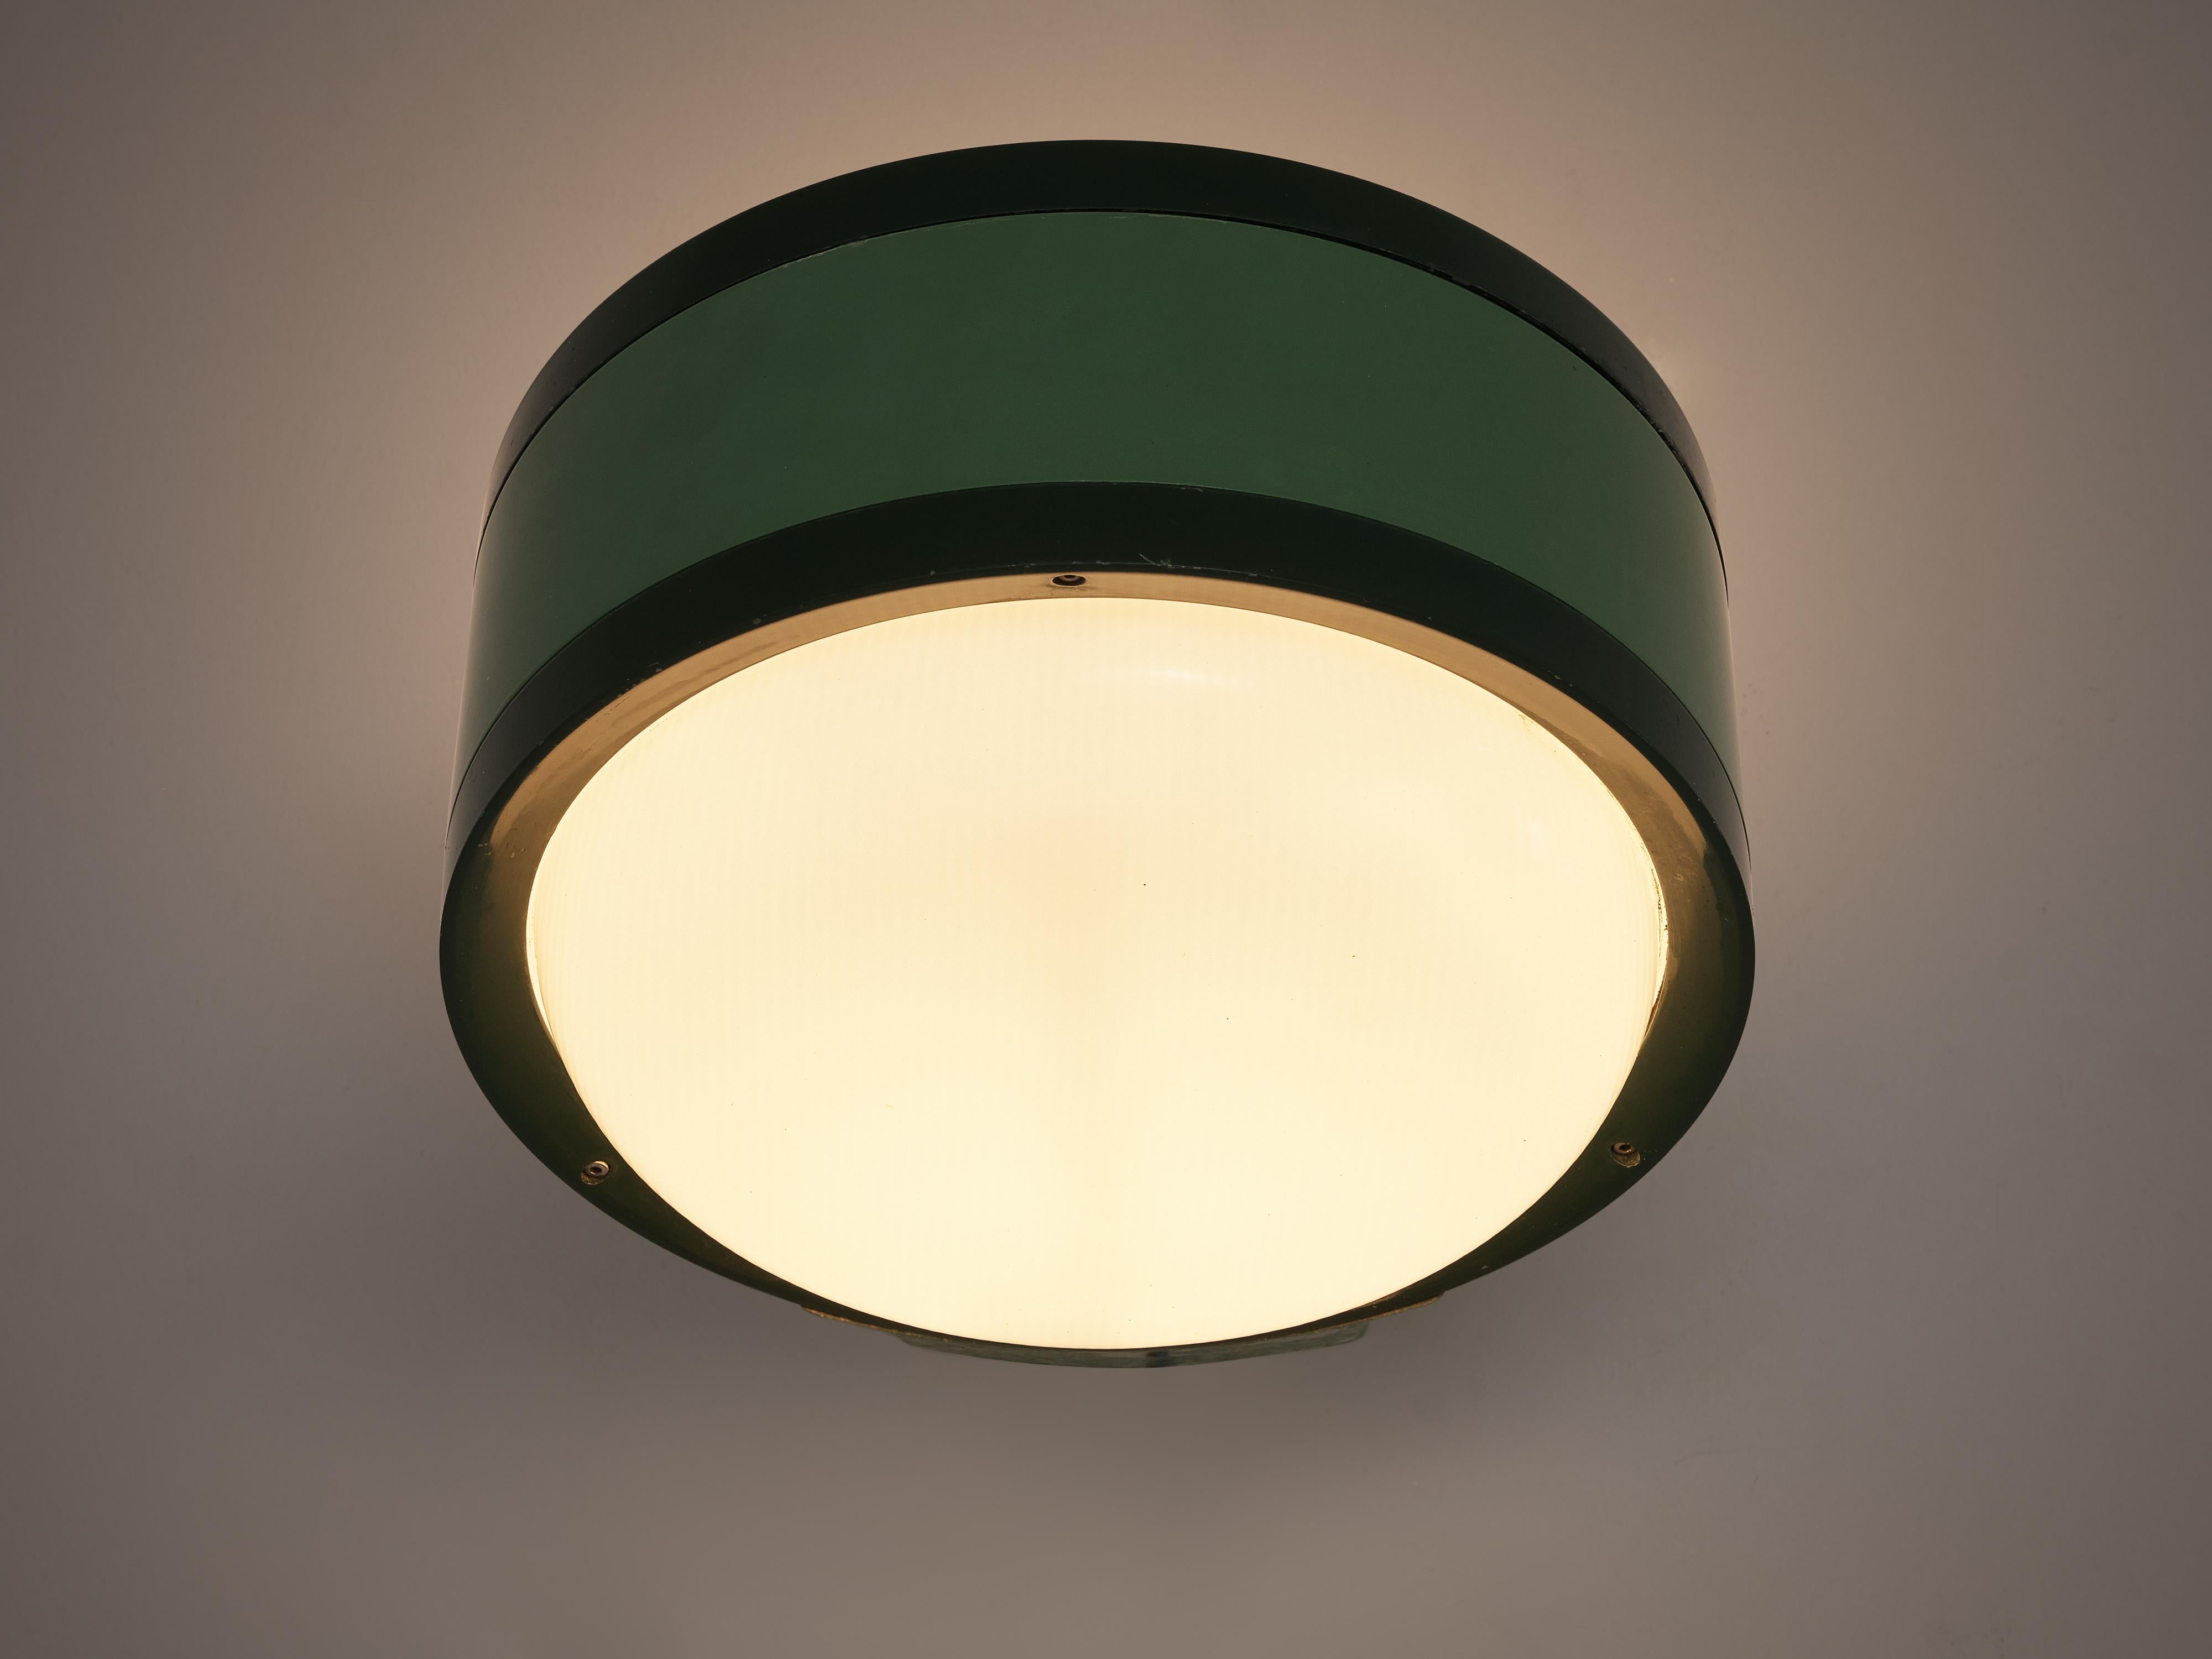 Late 20th Century Tobia Scarpa for Flos ‘Tamburo’ Wall Lights in Green Aluminum and Glass